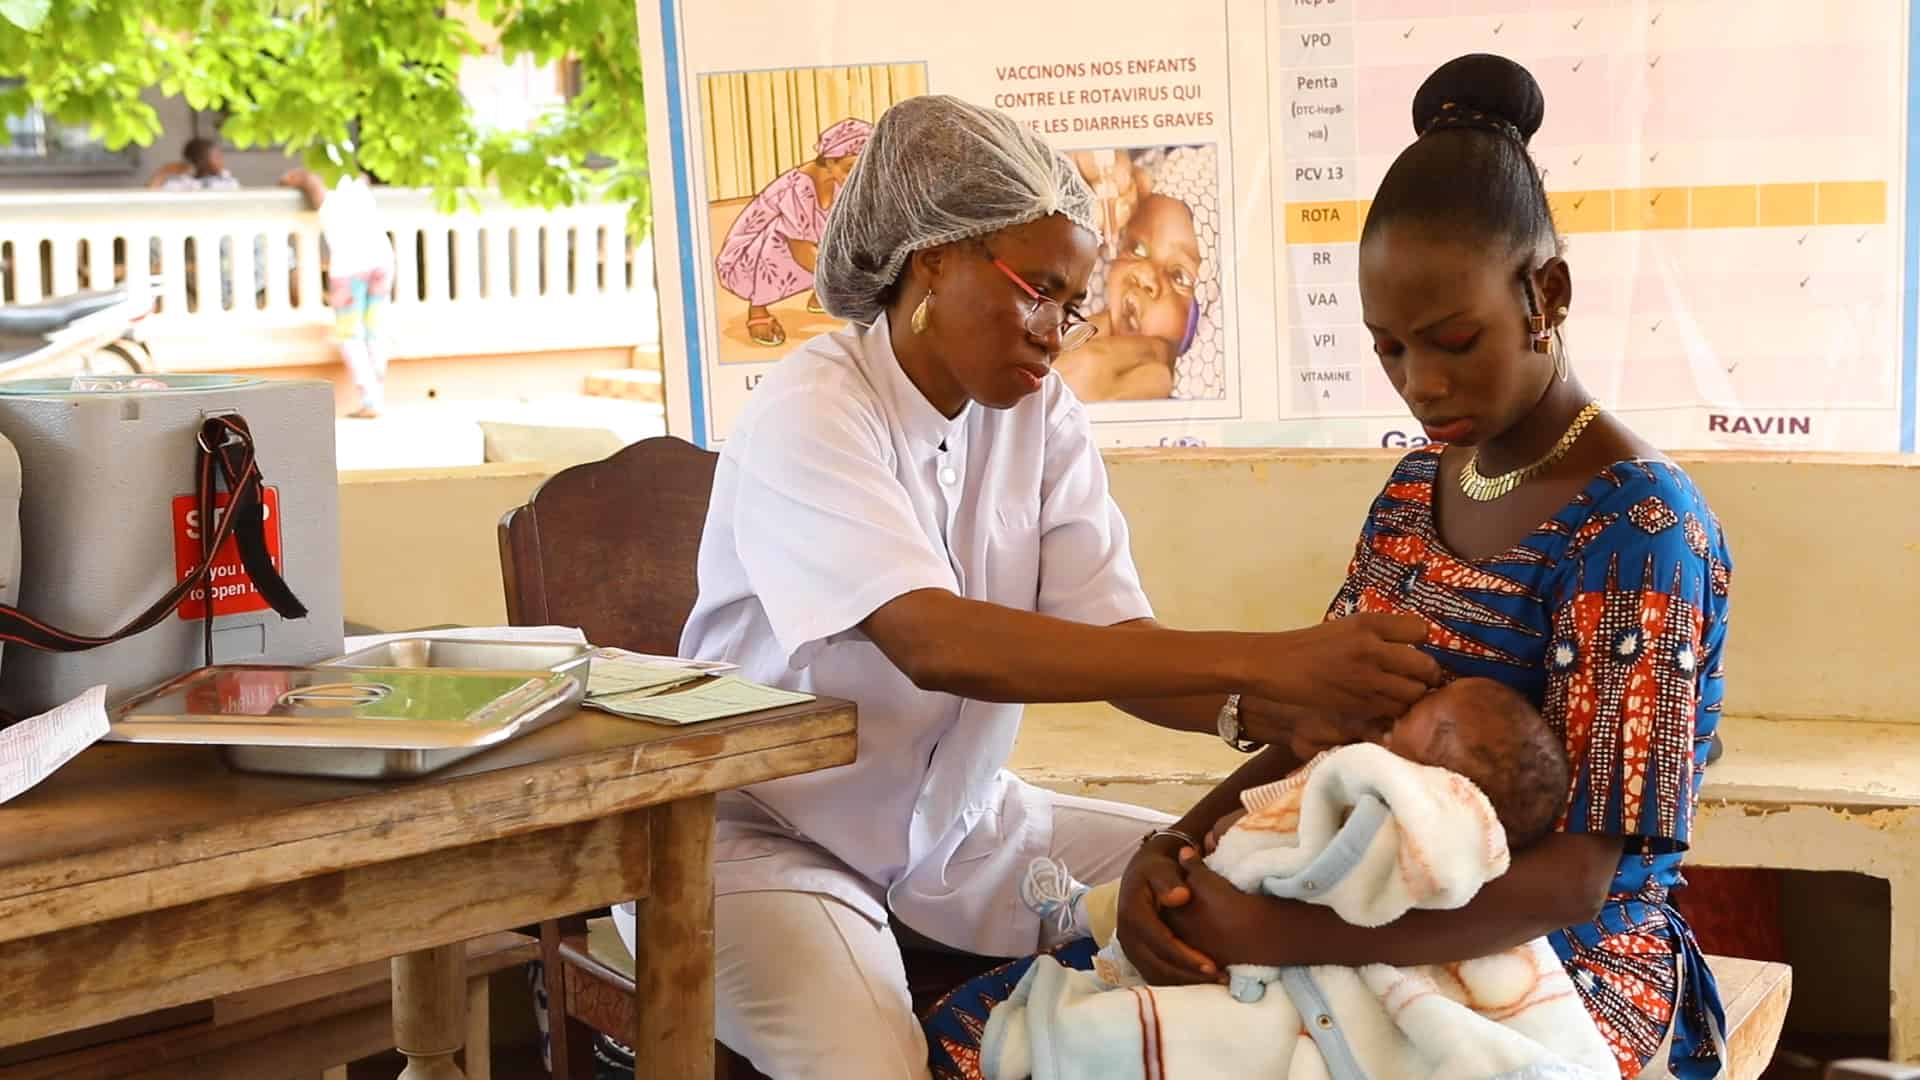 Strengthening Immunization Services through Person-centered Care